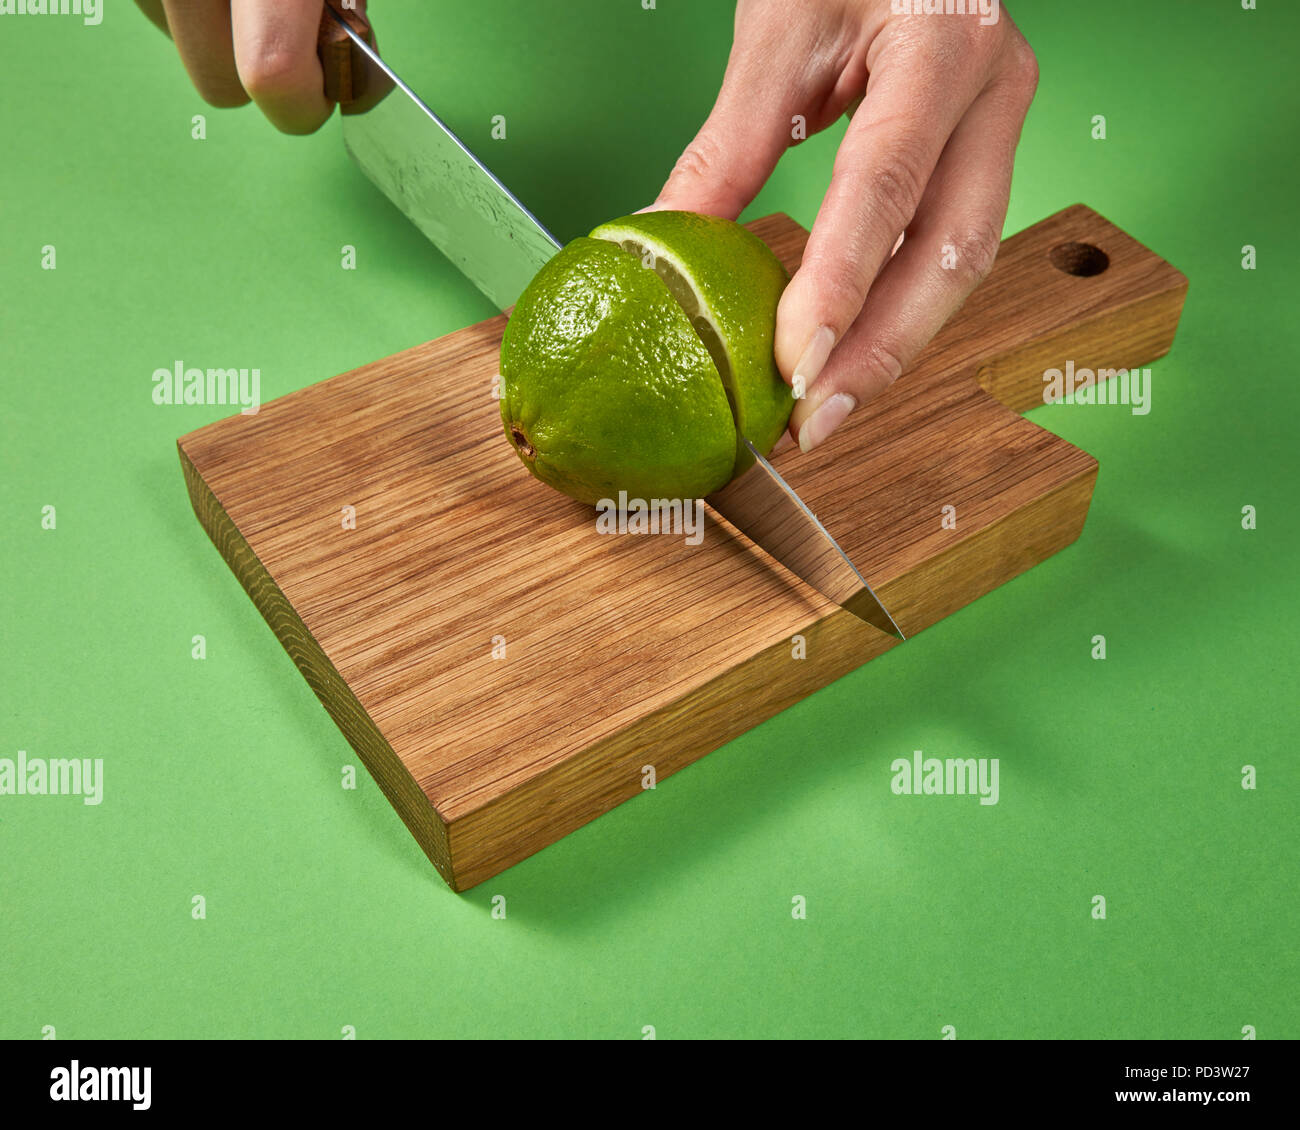 A girls' hands cut a green ripe lime in half on a wooden board on a green background. Stock Photo